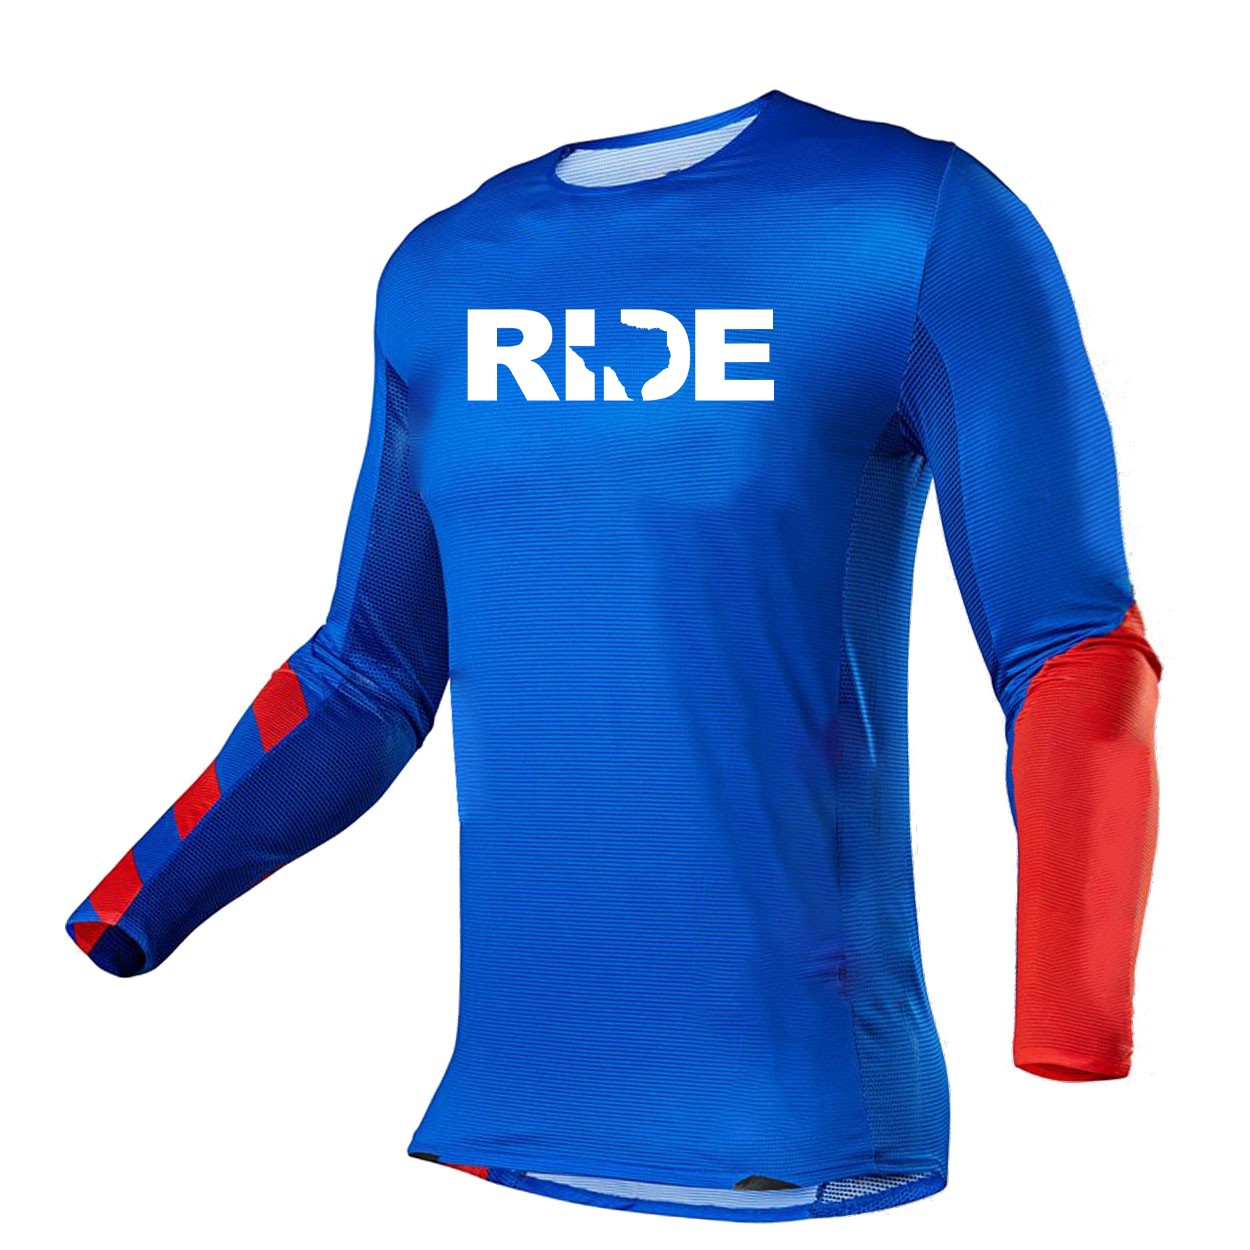 Ride Texas Classic Performance Jersey Long Sleeve Shirt Blue/Red